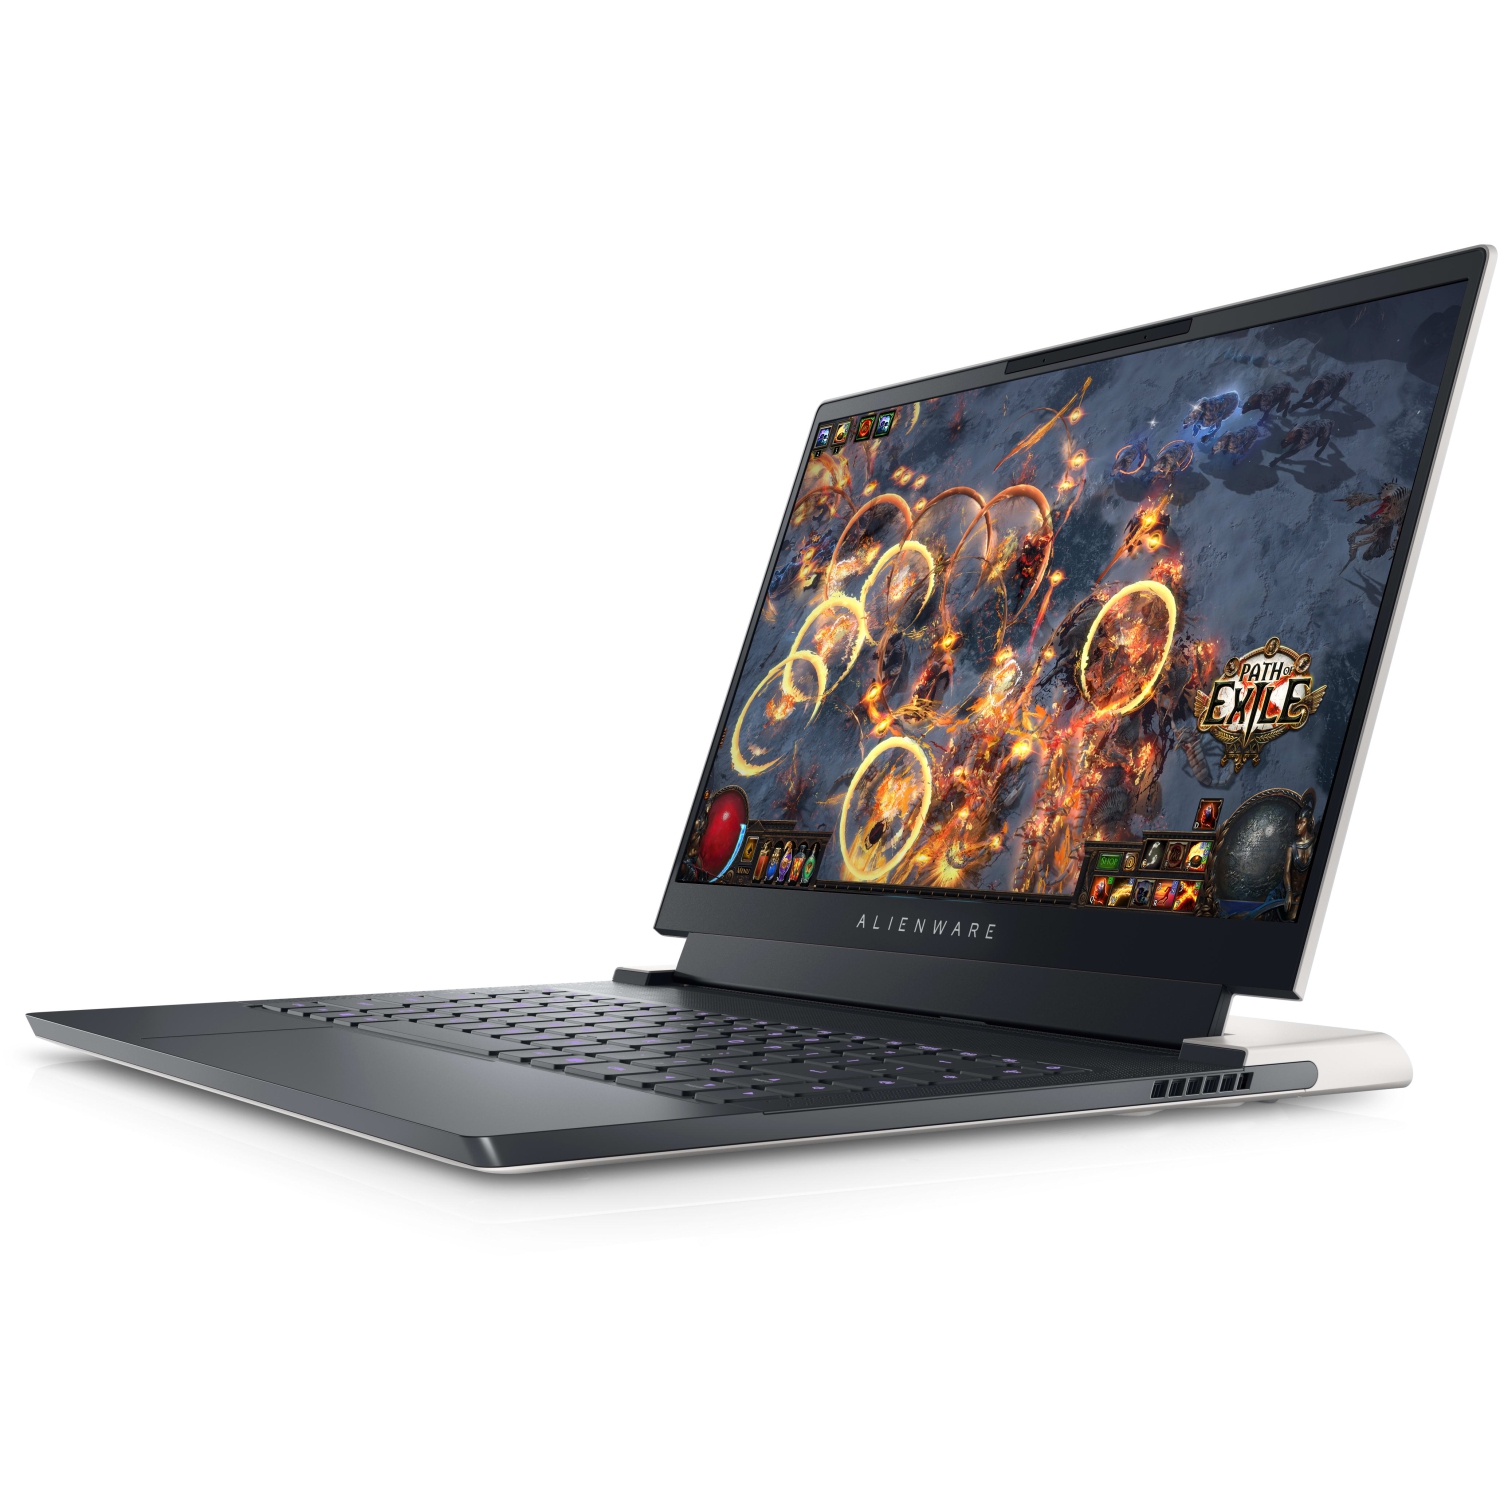 Refurbished (Excellent) – Dell Alienware X14 Gaming Laptop (2022) | 14" FHD | Core i7 - 4TB SSD - 16GB RAM - RTX 3060 | 14 Cores @ 4.7 GHz - 12th Gen CPU - 6GB GDDR6